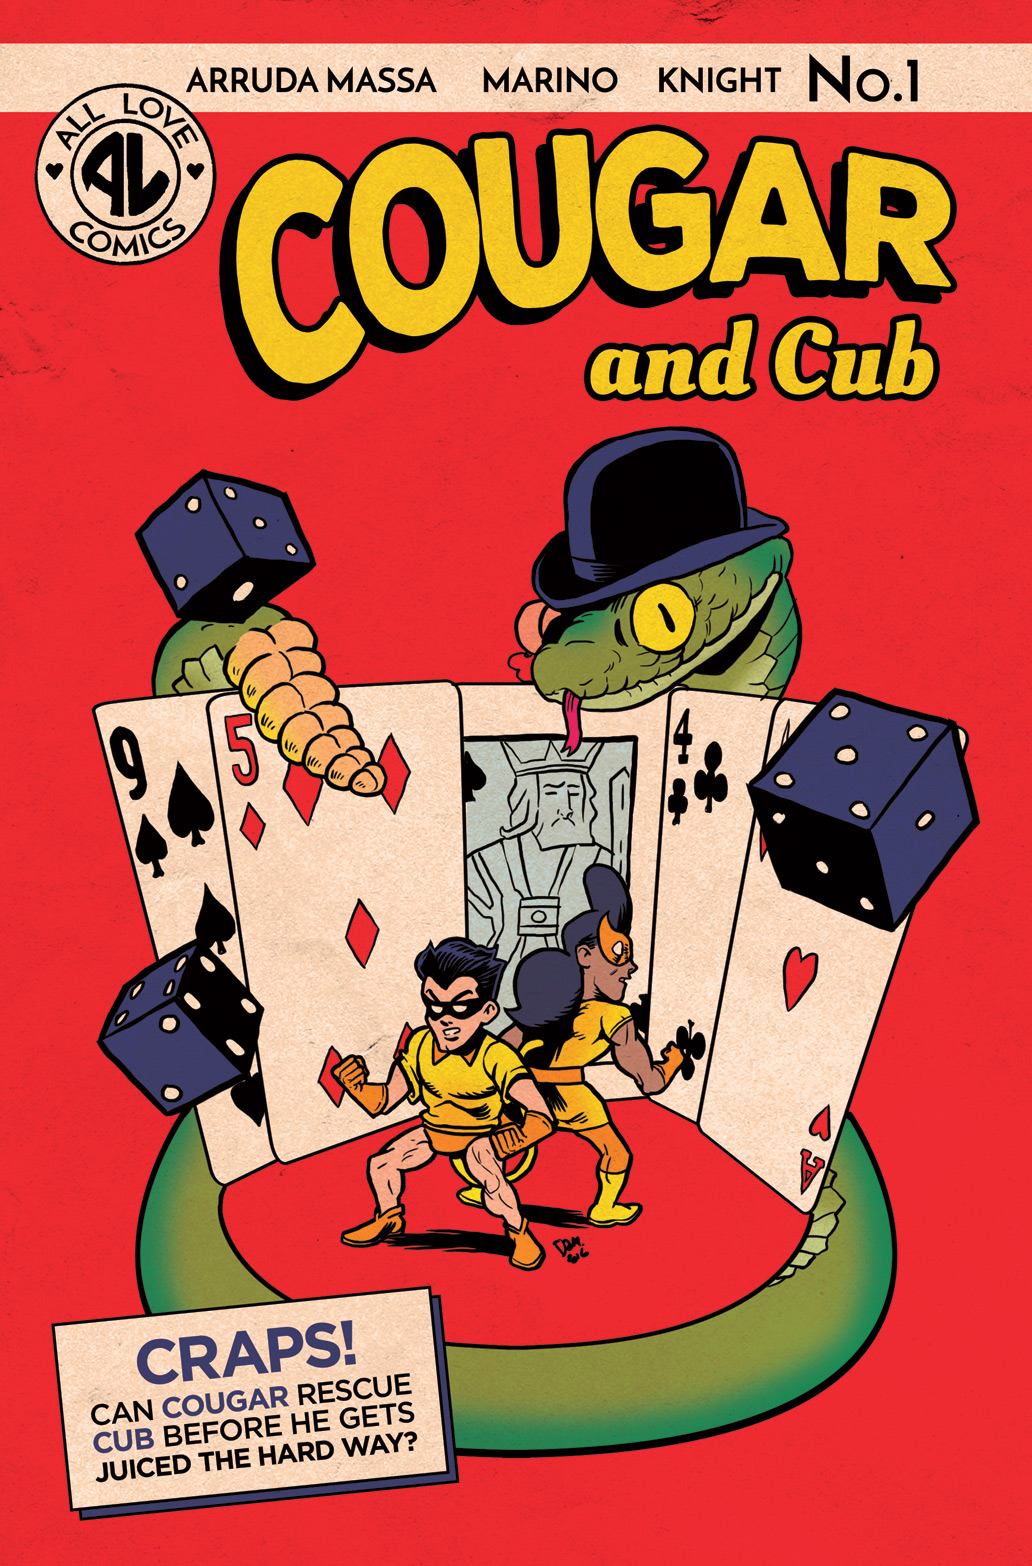 Cougar and Cub #1 flashback cover